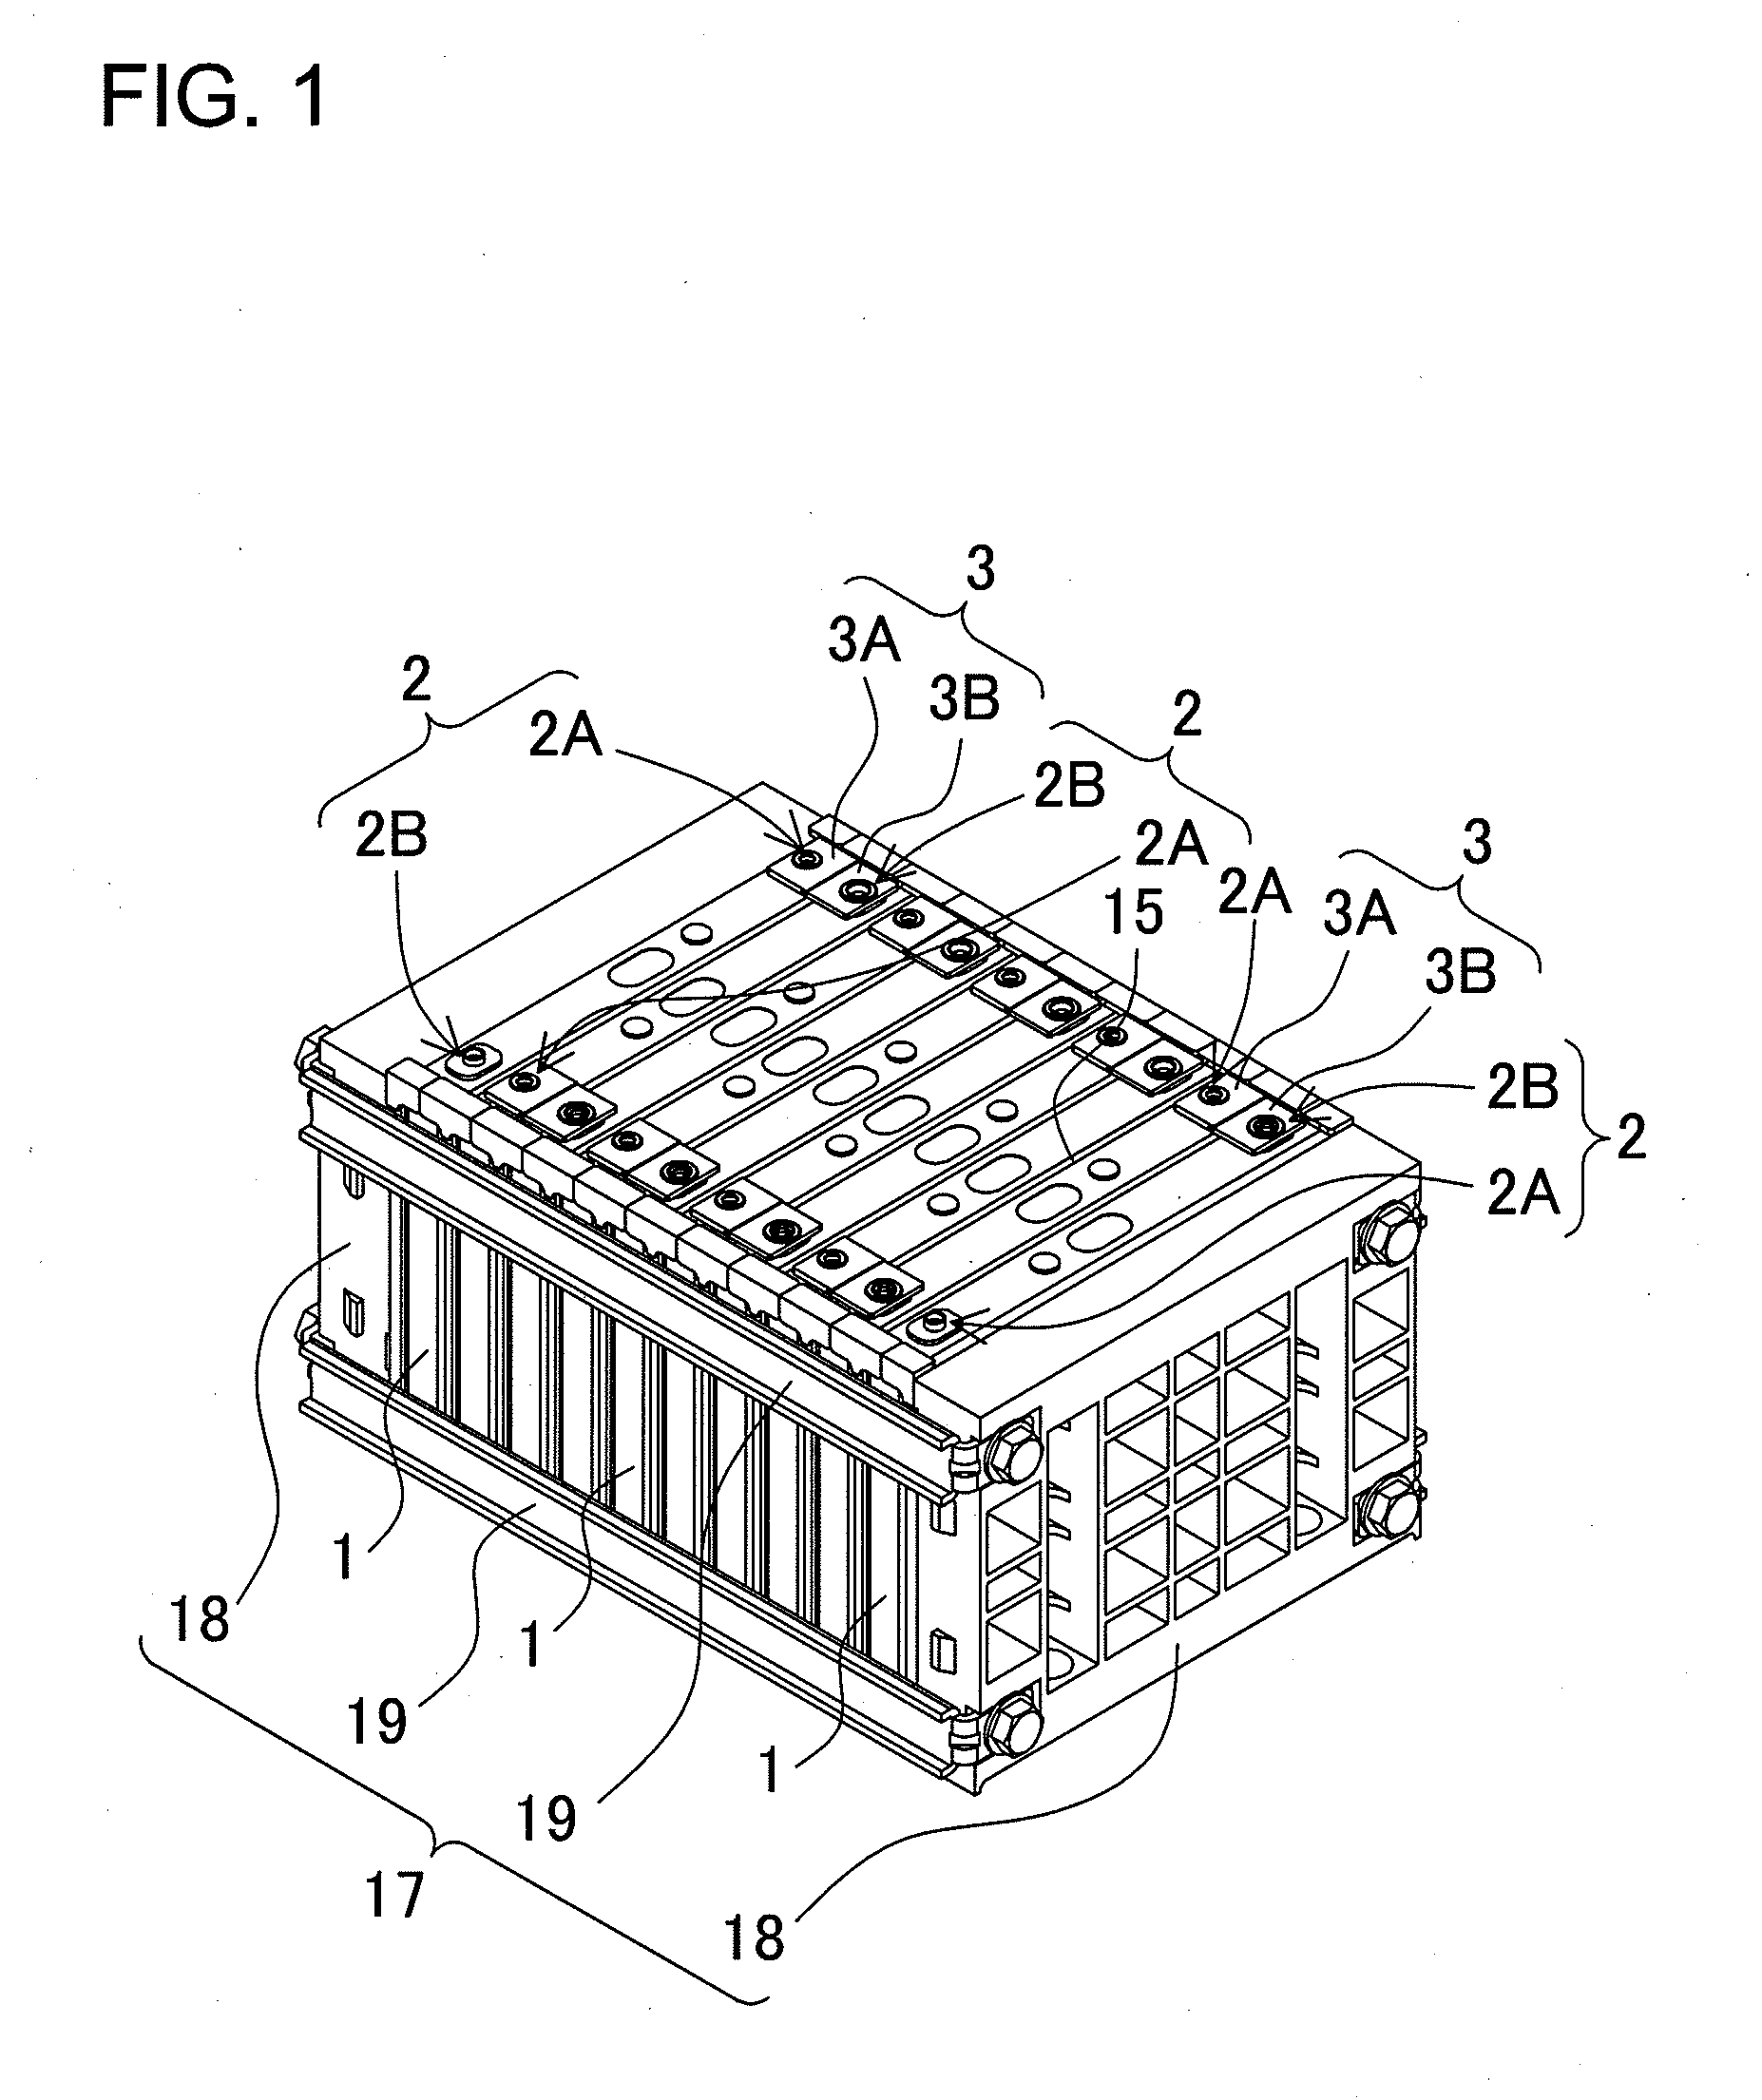 Battery array with reliable low-resistance connections